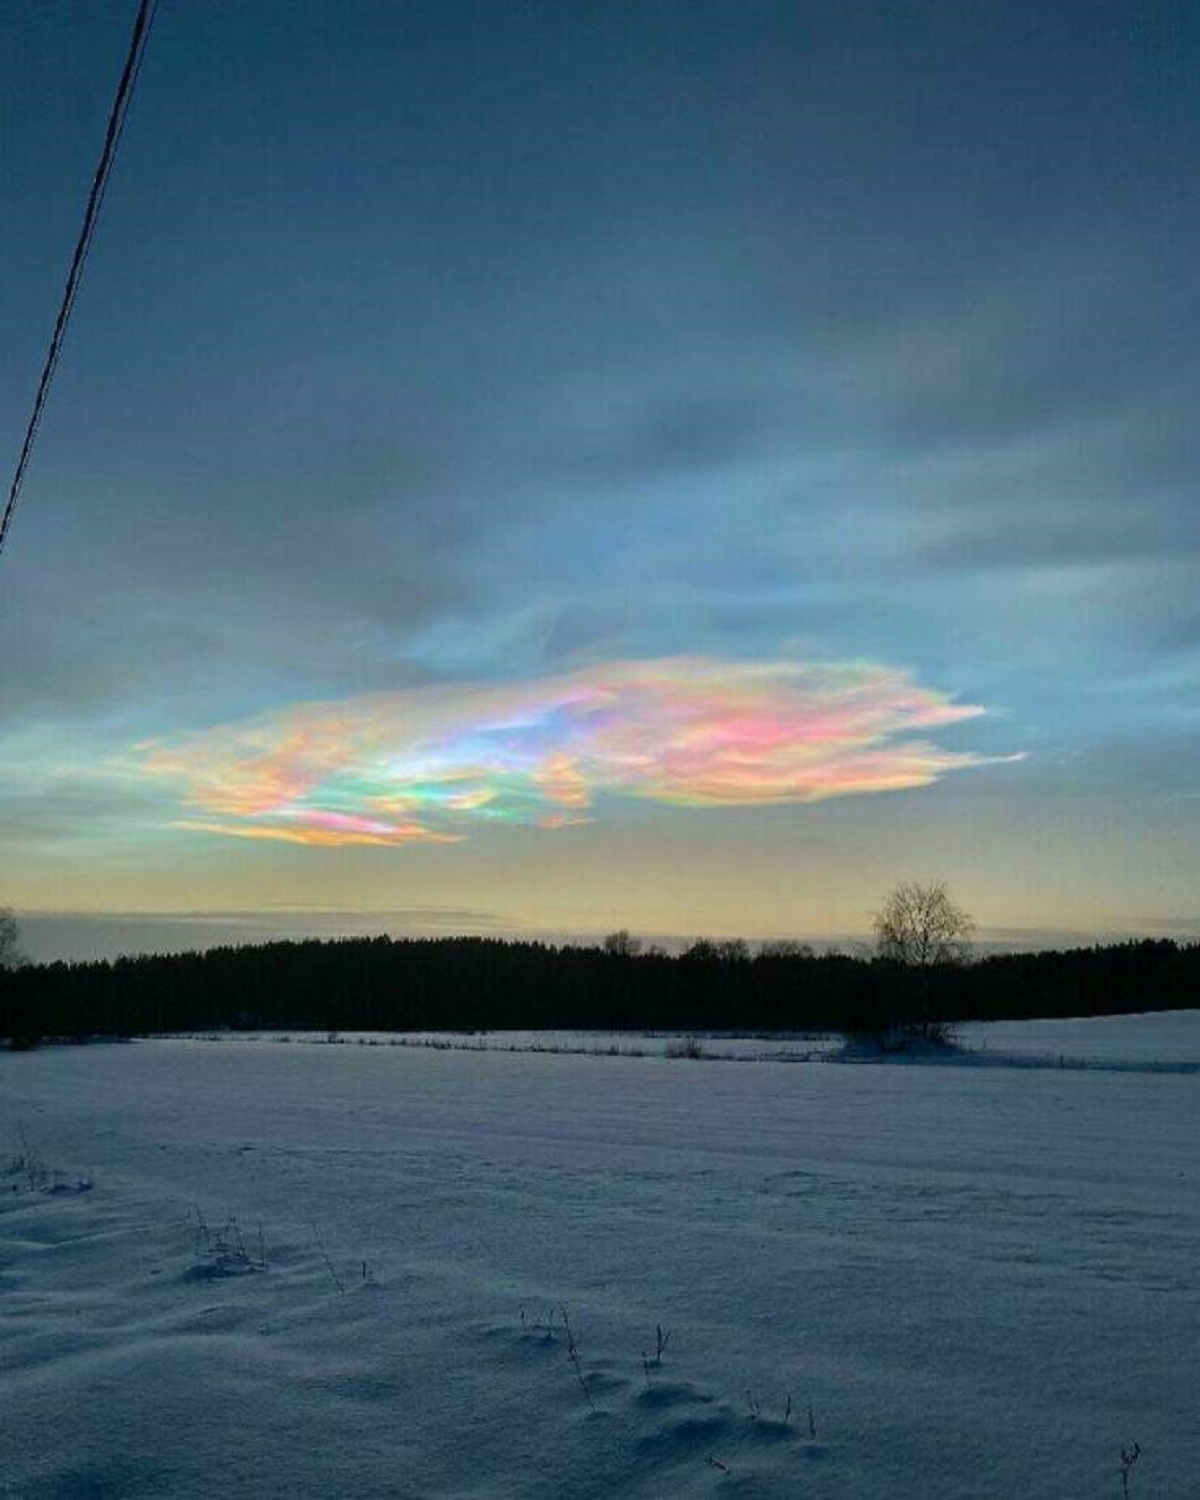 "Iridescent Clouds Are A Diffraction Phenomenon Caused By Small Water Droplets Or Small Ice Crystals Individually Scattering Light"